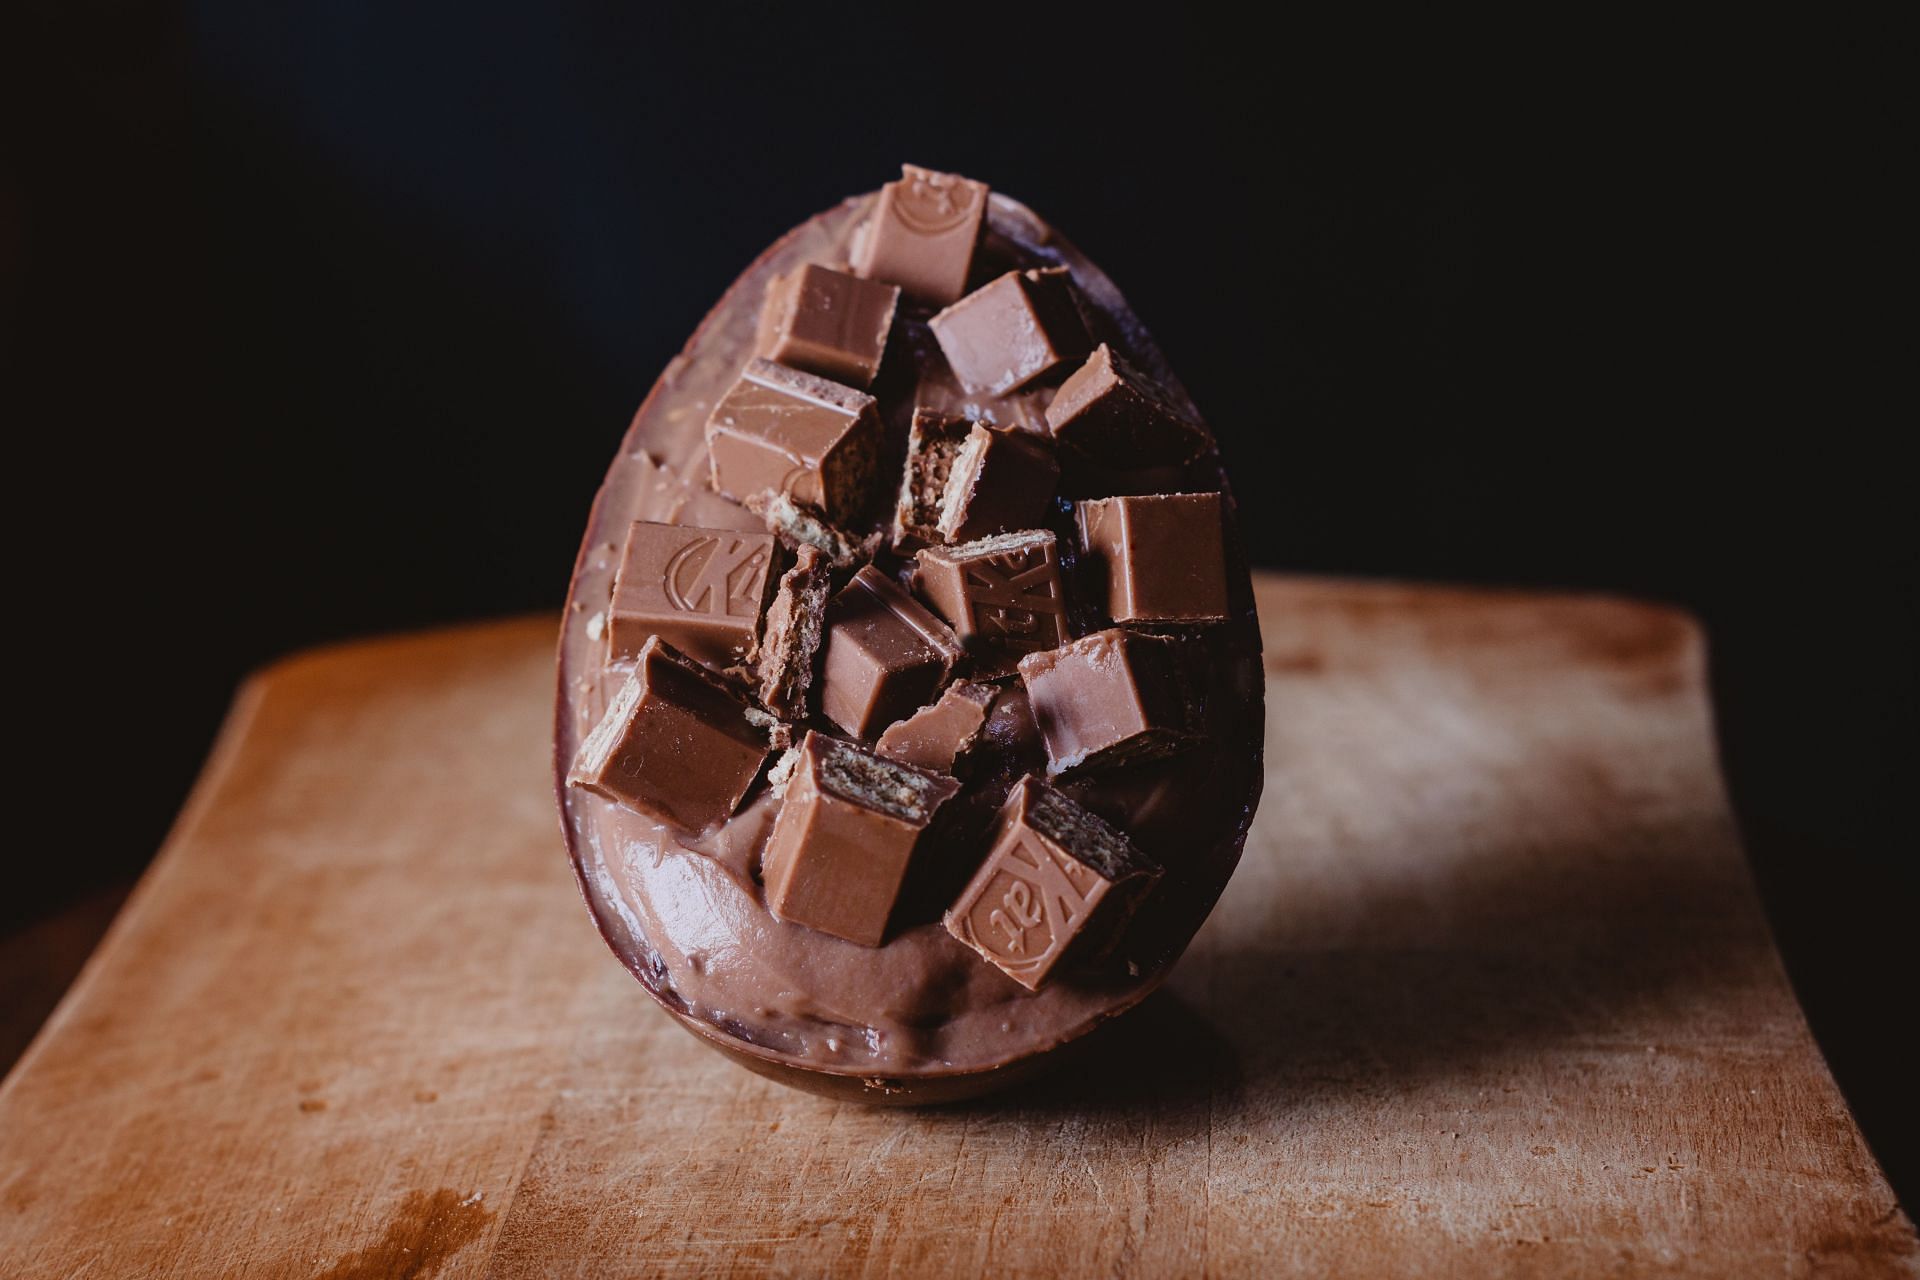 Chocolates for healthy skin in winter (image sourced via Pexels / Photo by Jakson)